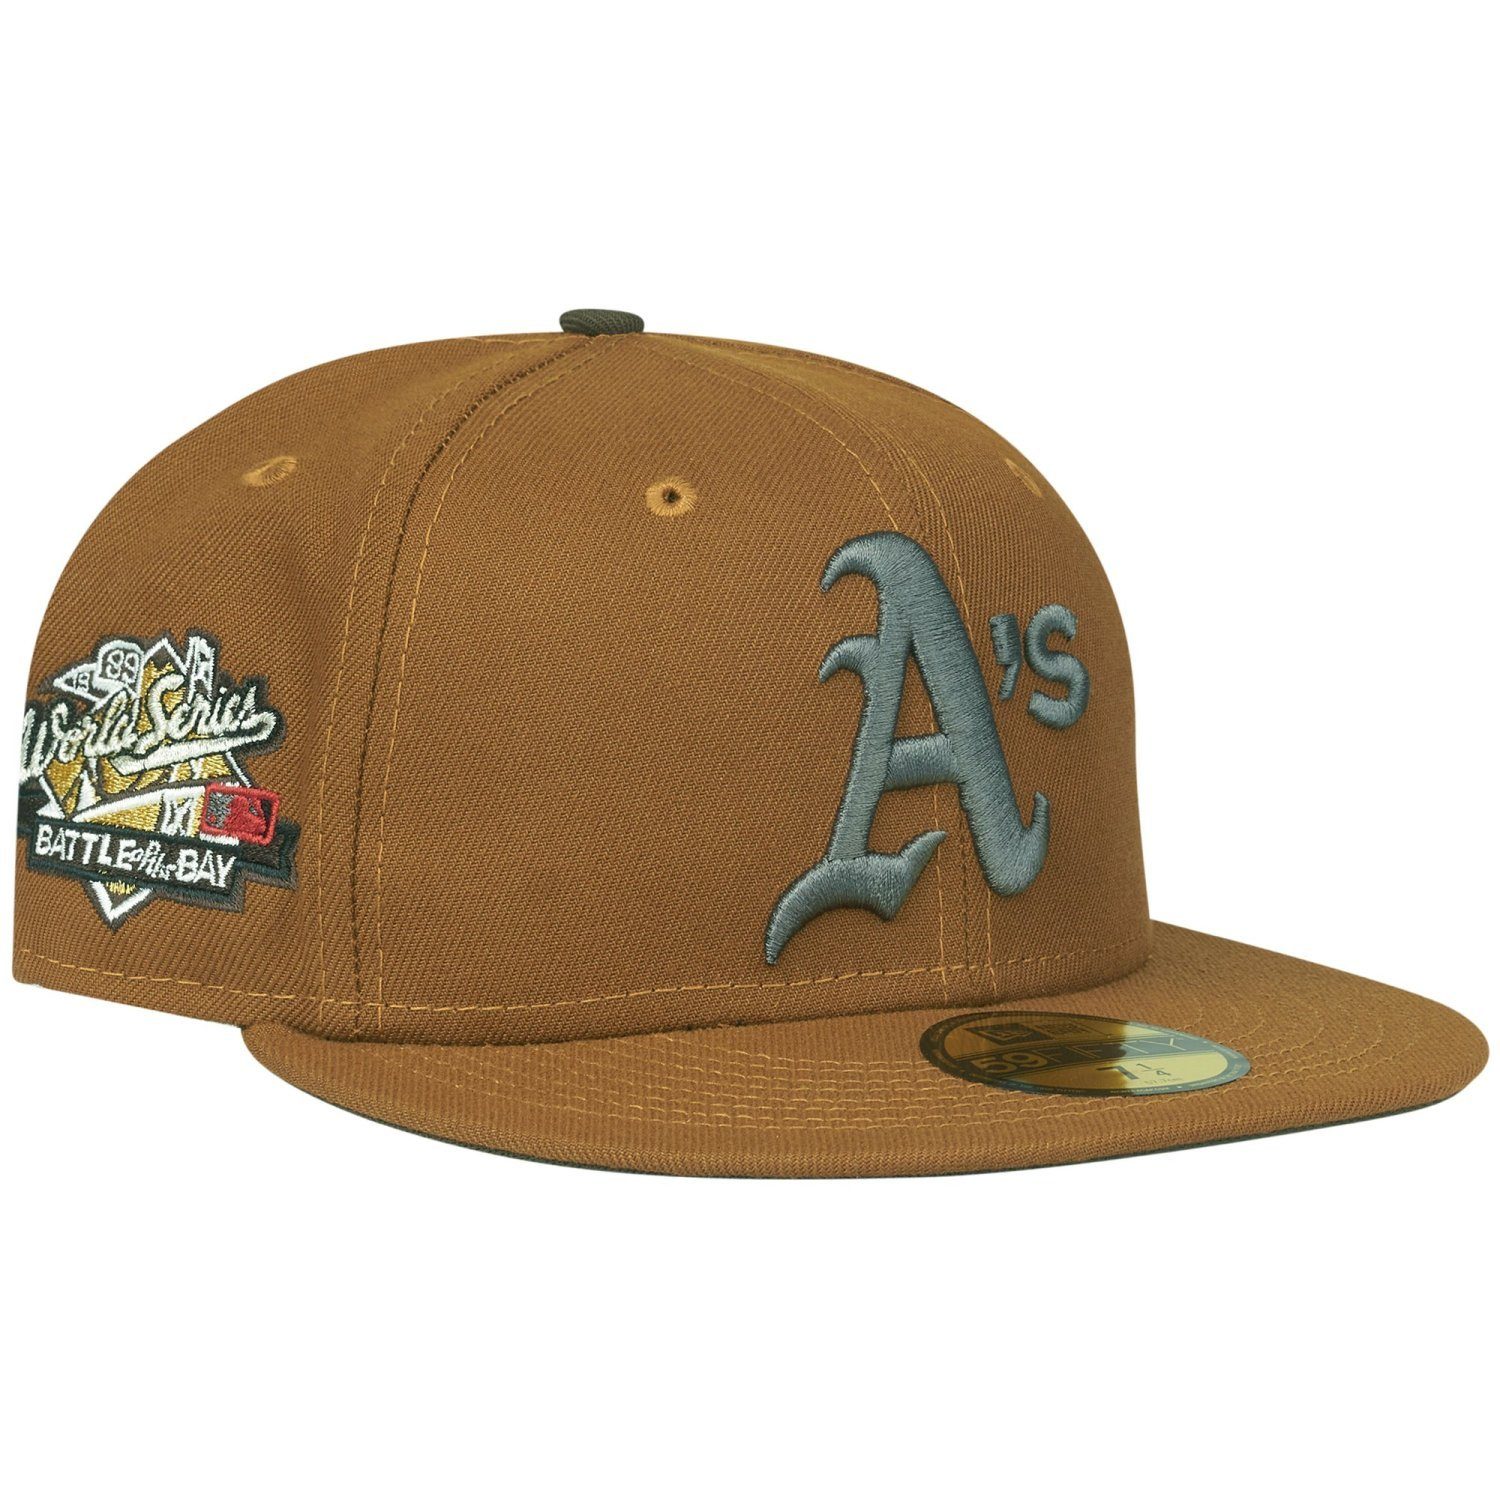 1989 Athletics New WORLD 59Fifty SERIES Era Oakland Cap Fitted